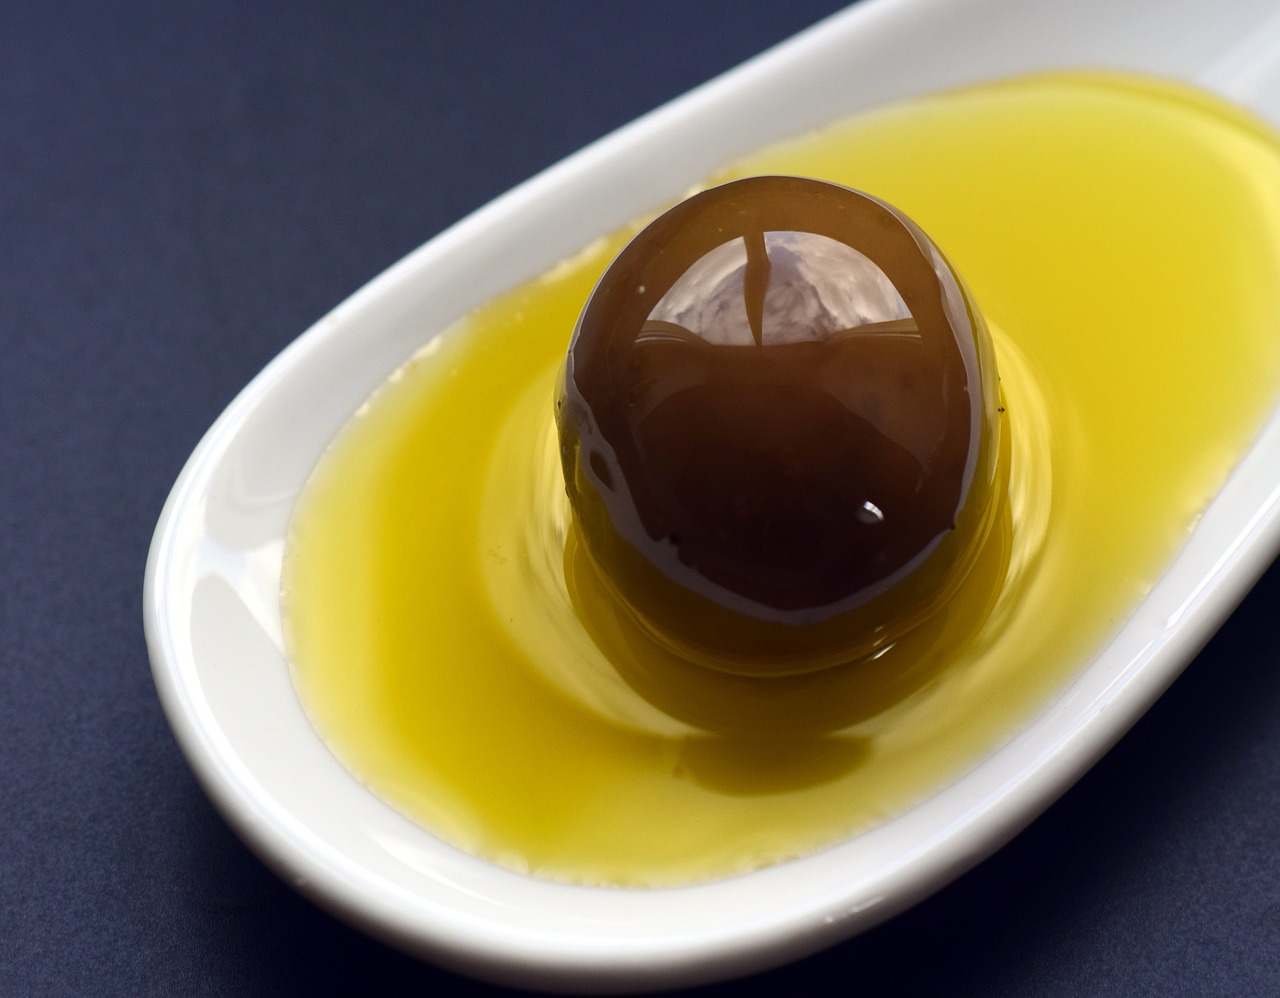 Should I Cook with Olive Oil or Save it for Salad?